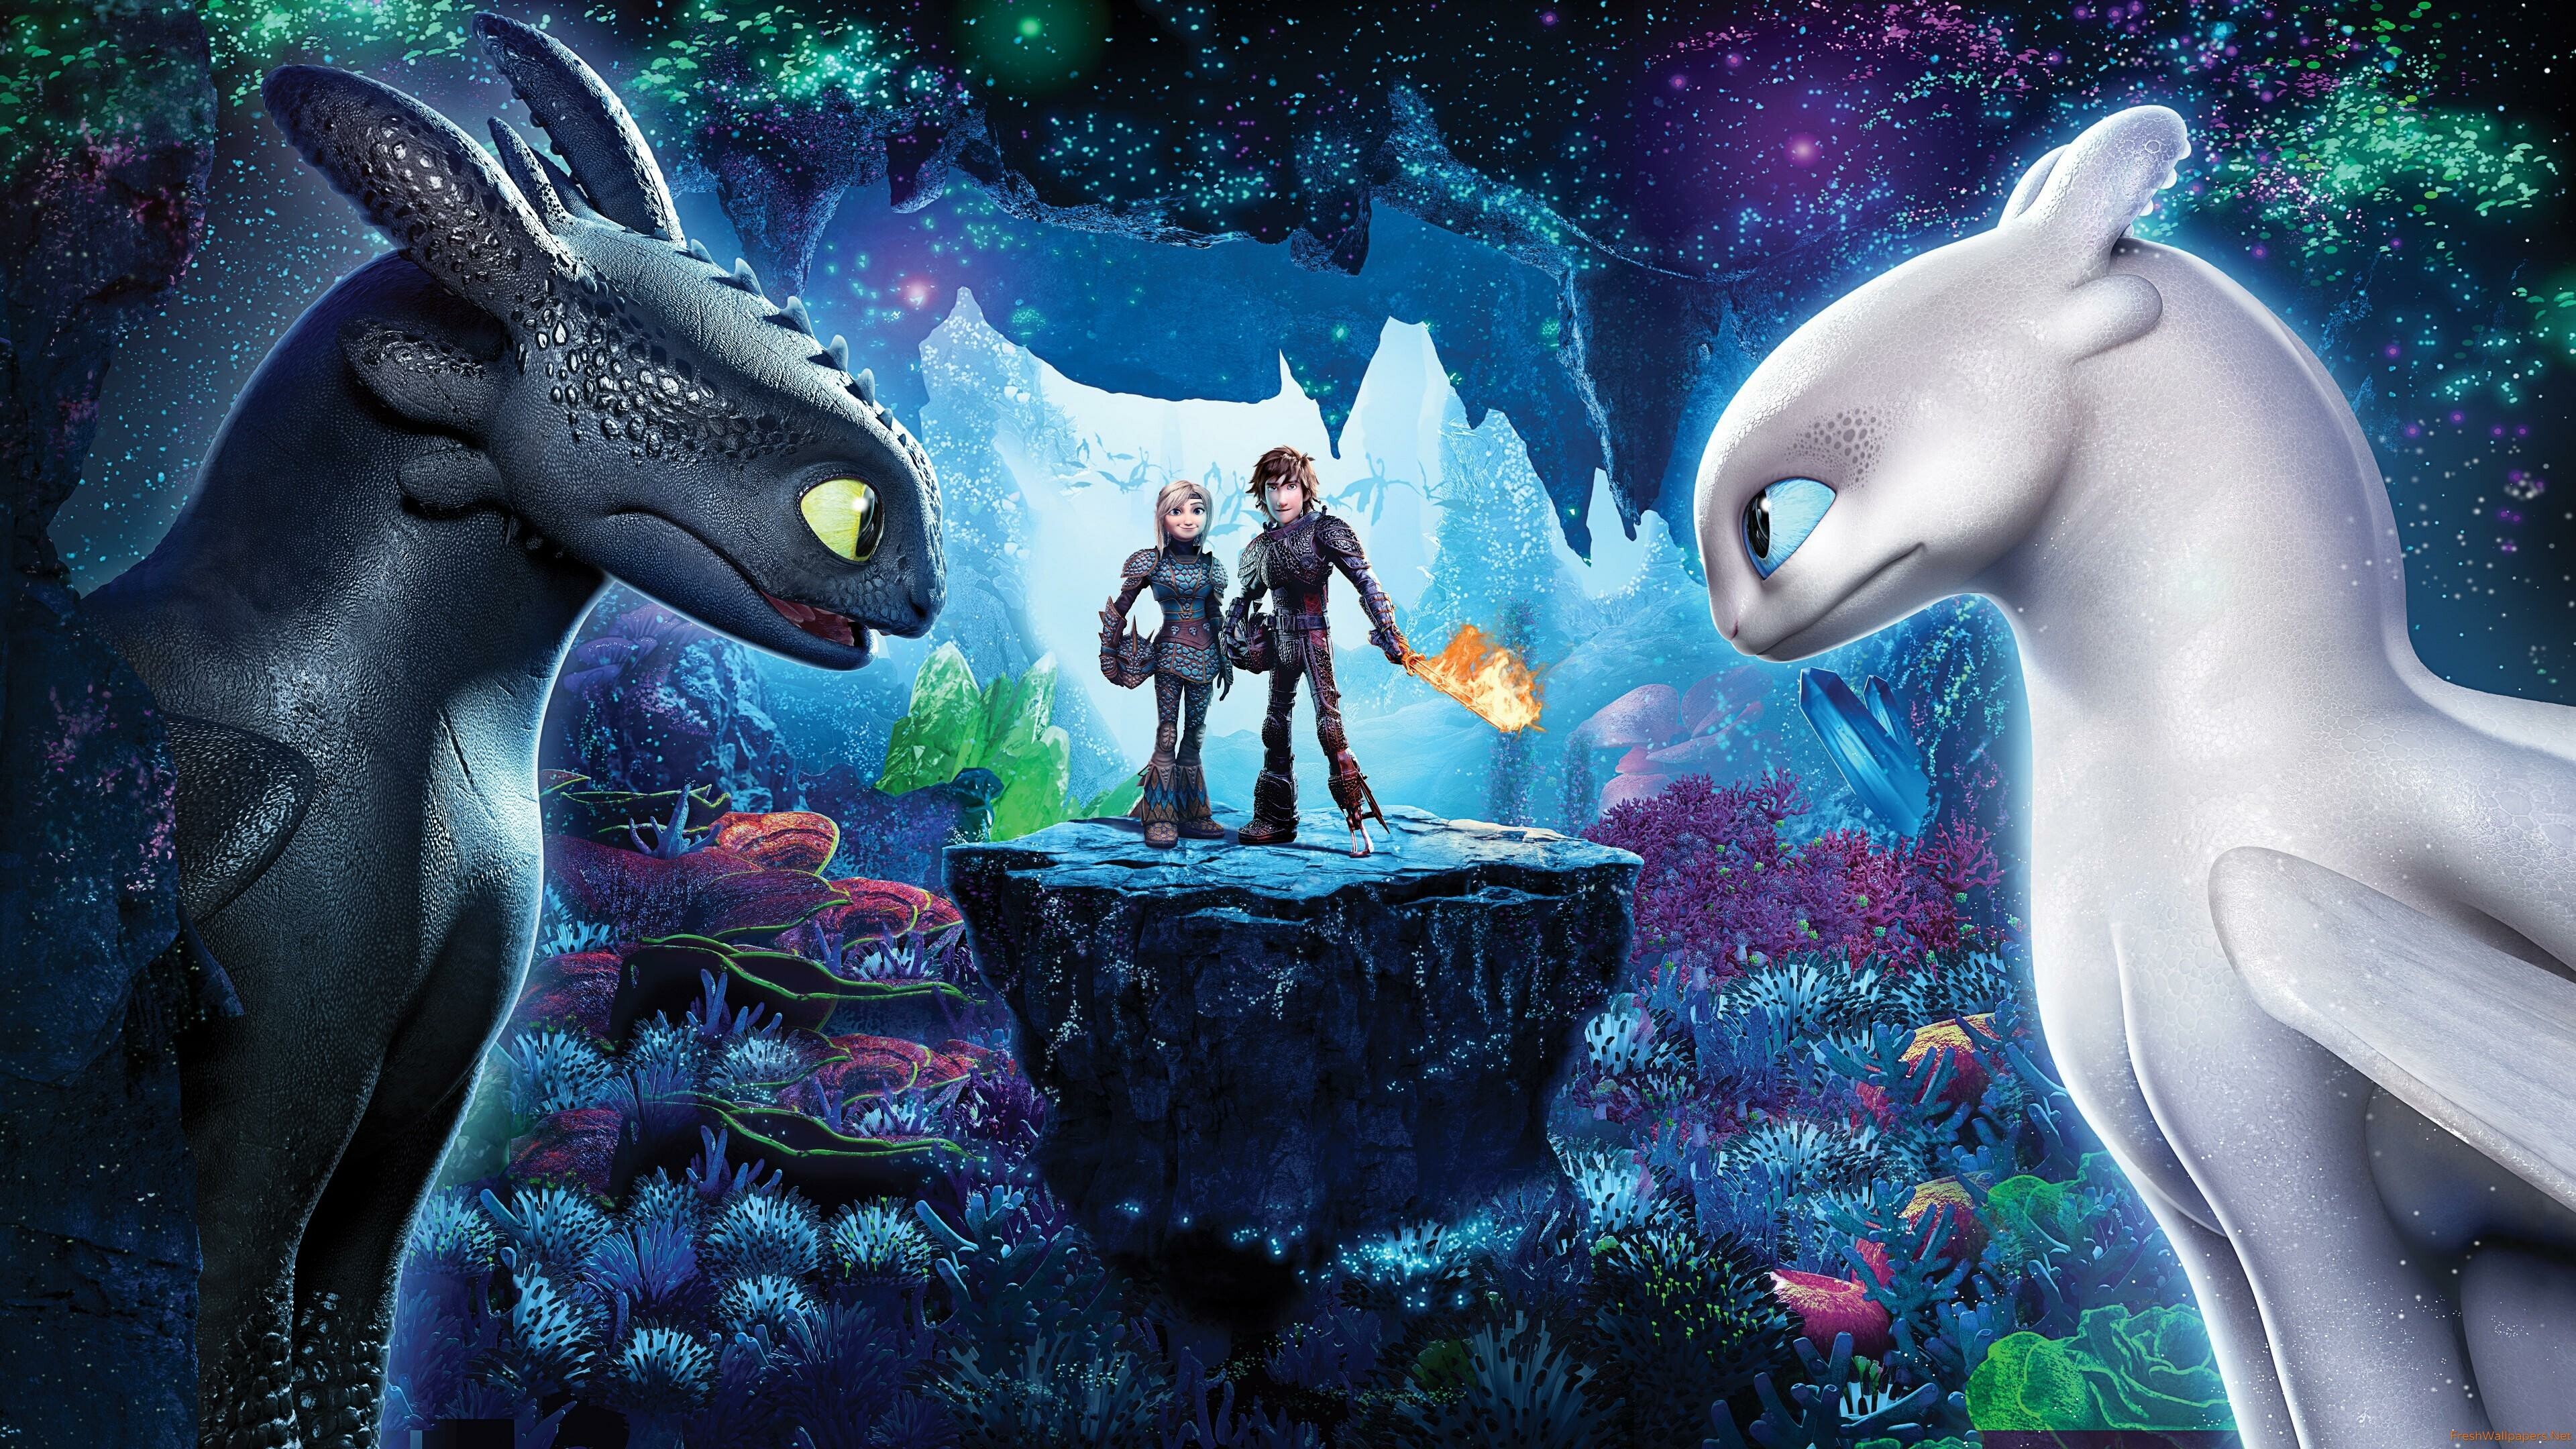 How to Train Your Dragon: Hiccup, an undersized teen, befriends the dragon, Paramount Pictures. 3840x2160 4K Wallpaper.